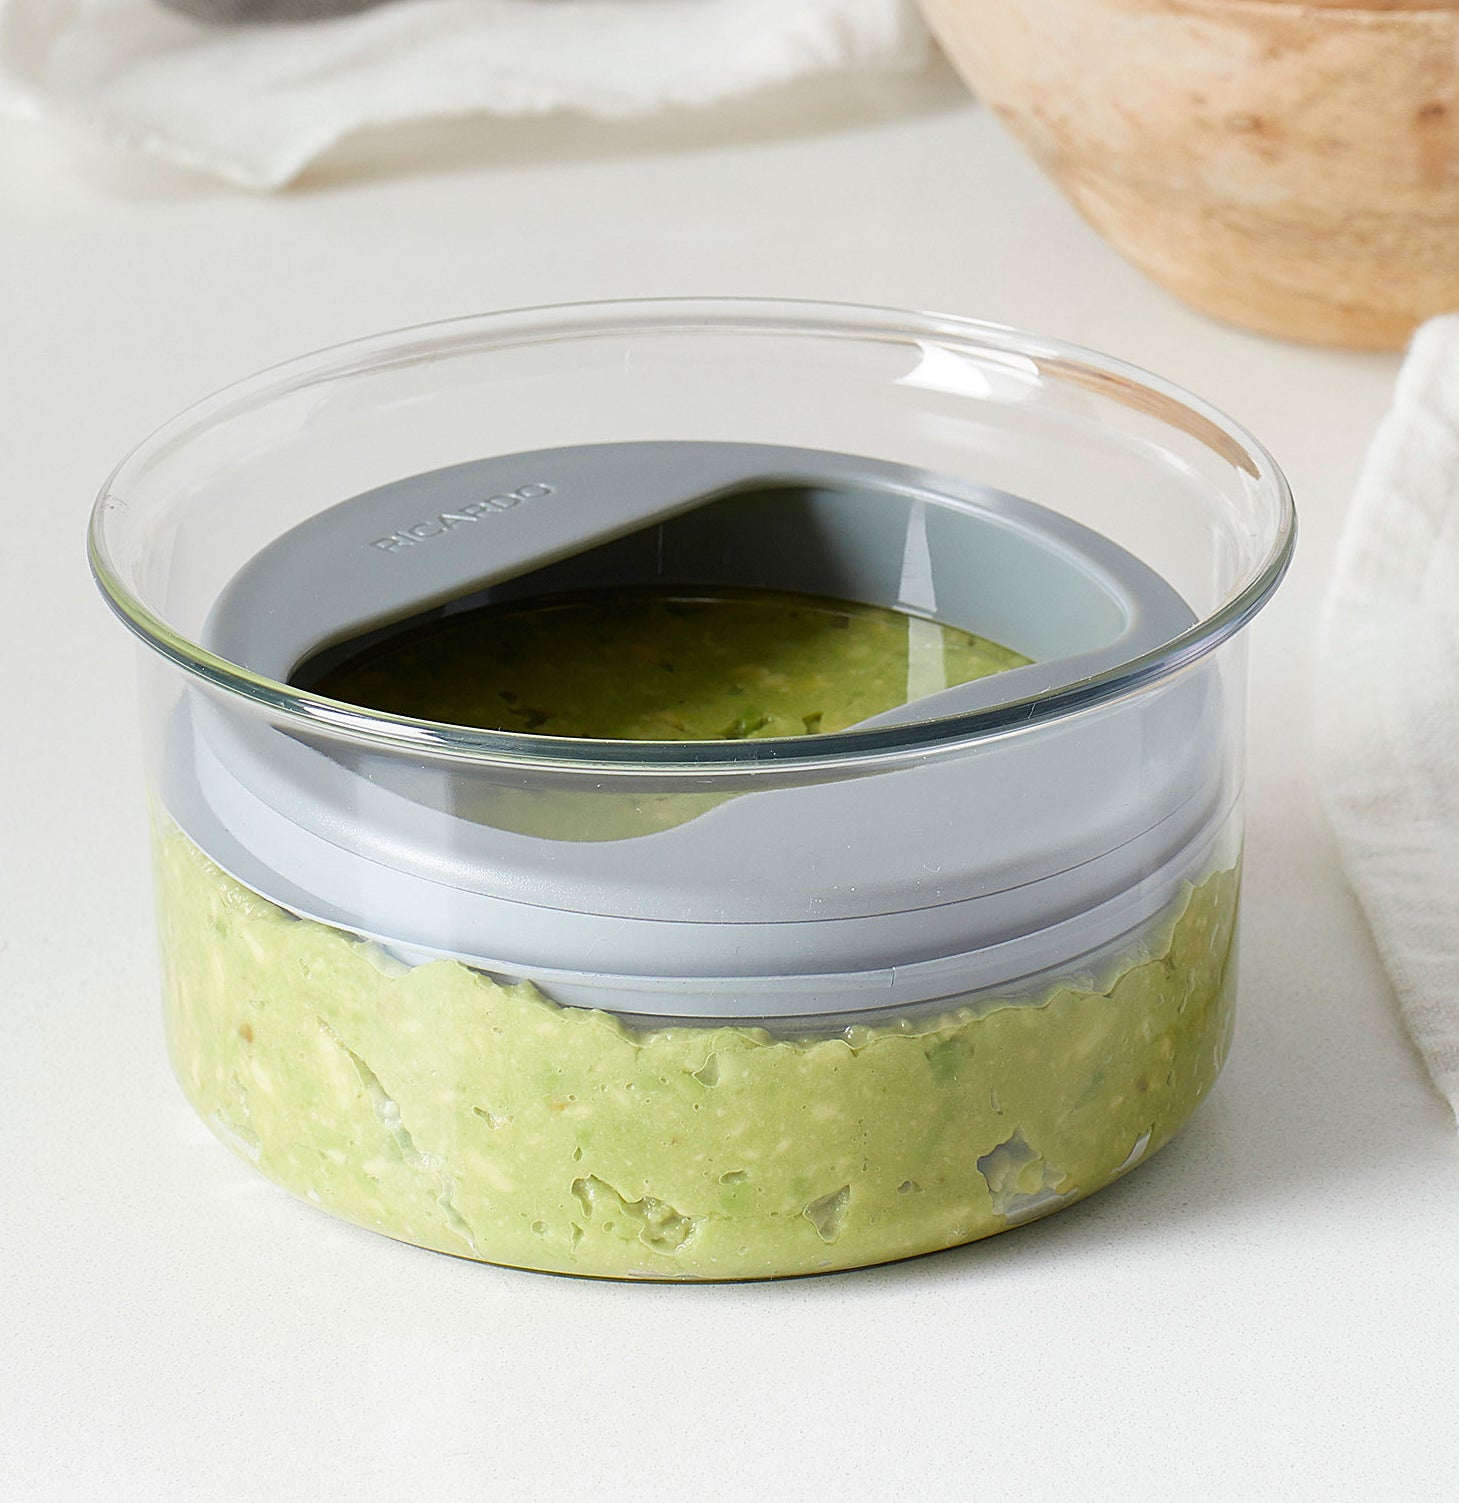 The airtight container filled with guacamole